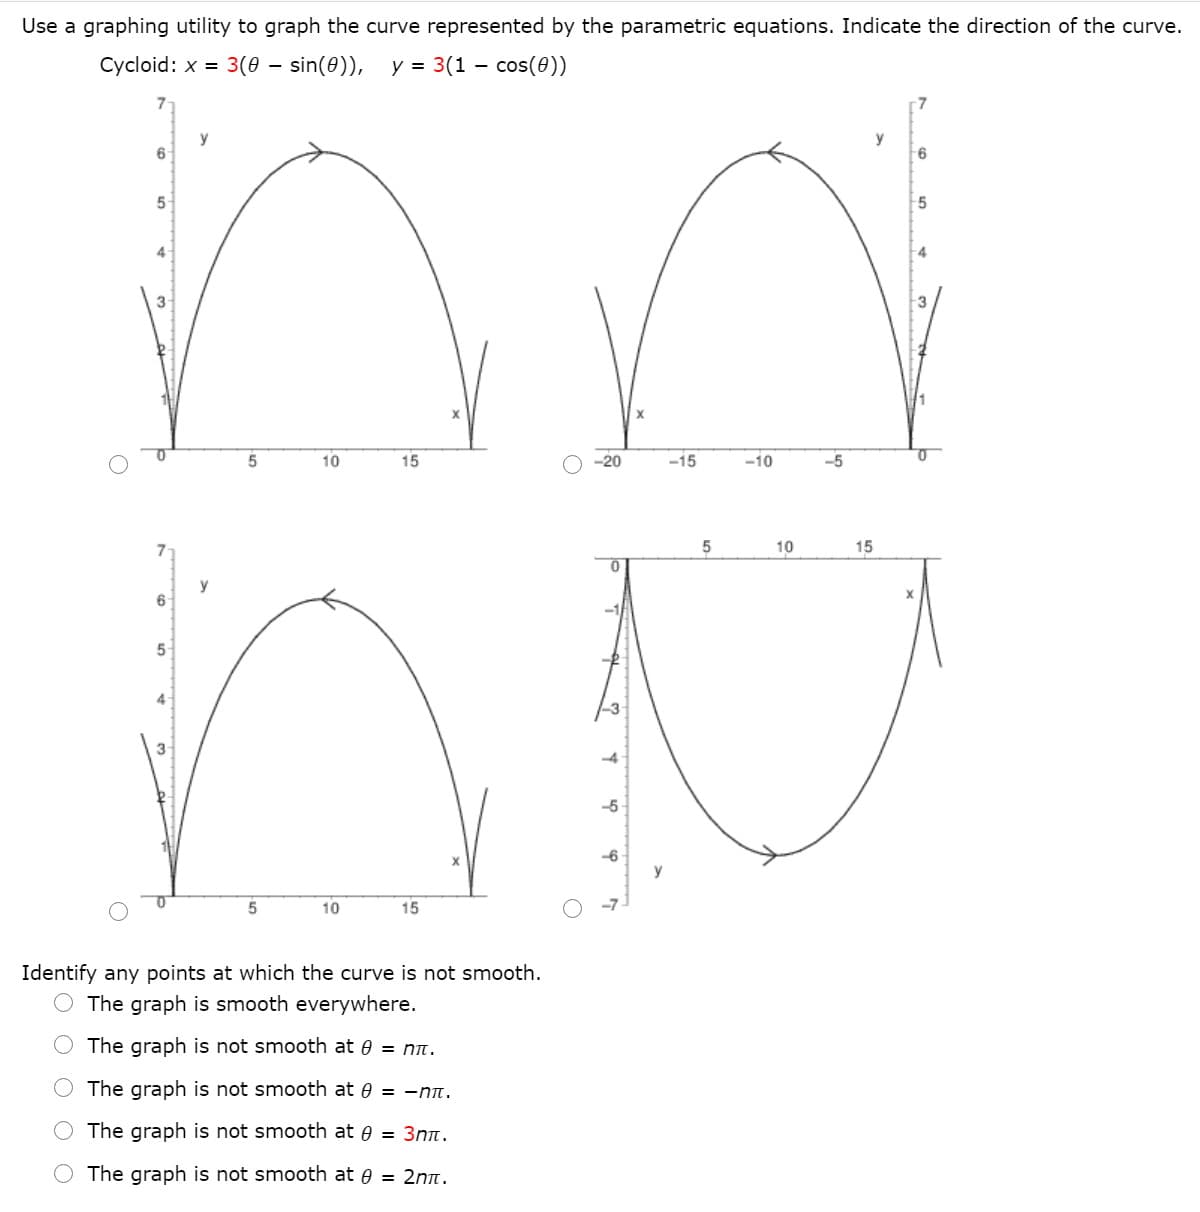 Use a graphing utility to graph the curve represented by the parametric equations. Indicate the direction of the curve.
Cycloid: x = 3(0 – sin(0)),
y = 3(1 – cos(0))
-
y
y
6
6
5-
-5
4
-4
3
10
15
-20
-15
-10
-5
7
10
15
y
6
4
-4
-5
-6
y
10
15
Identify any points at which the curve is not smooth.
O The graph is smooth everywhere.
The graph is not smooth at 0 = nn.
The graph is not smooth at e = -nt.
The graph is not smooth at e = 3nn.
The graph is not smooth at 0 = 2nn.
